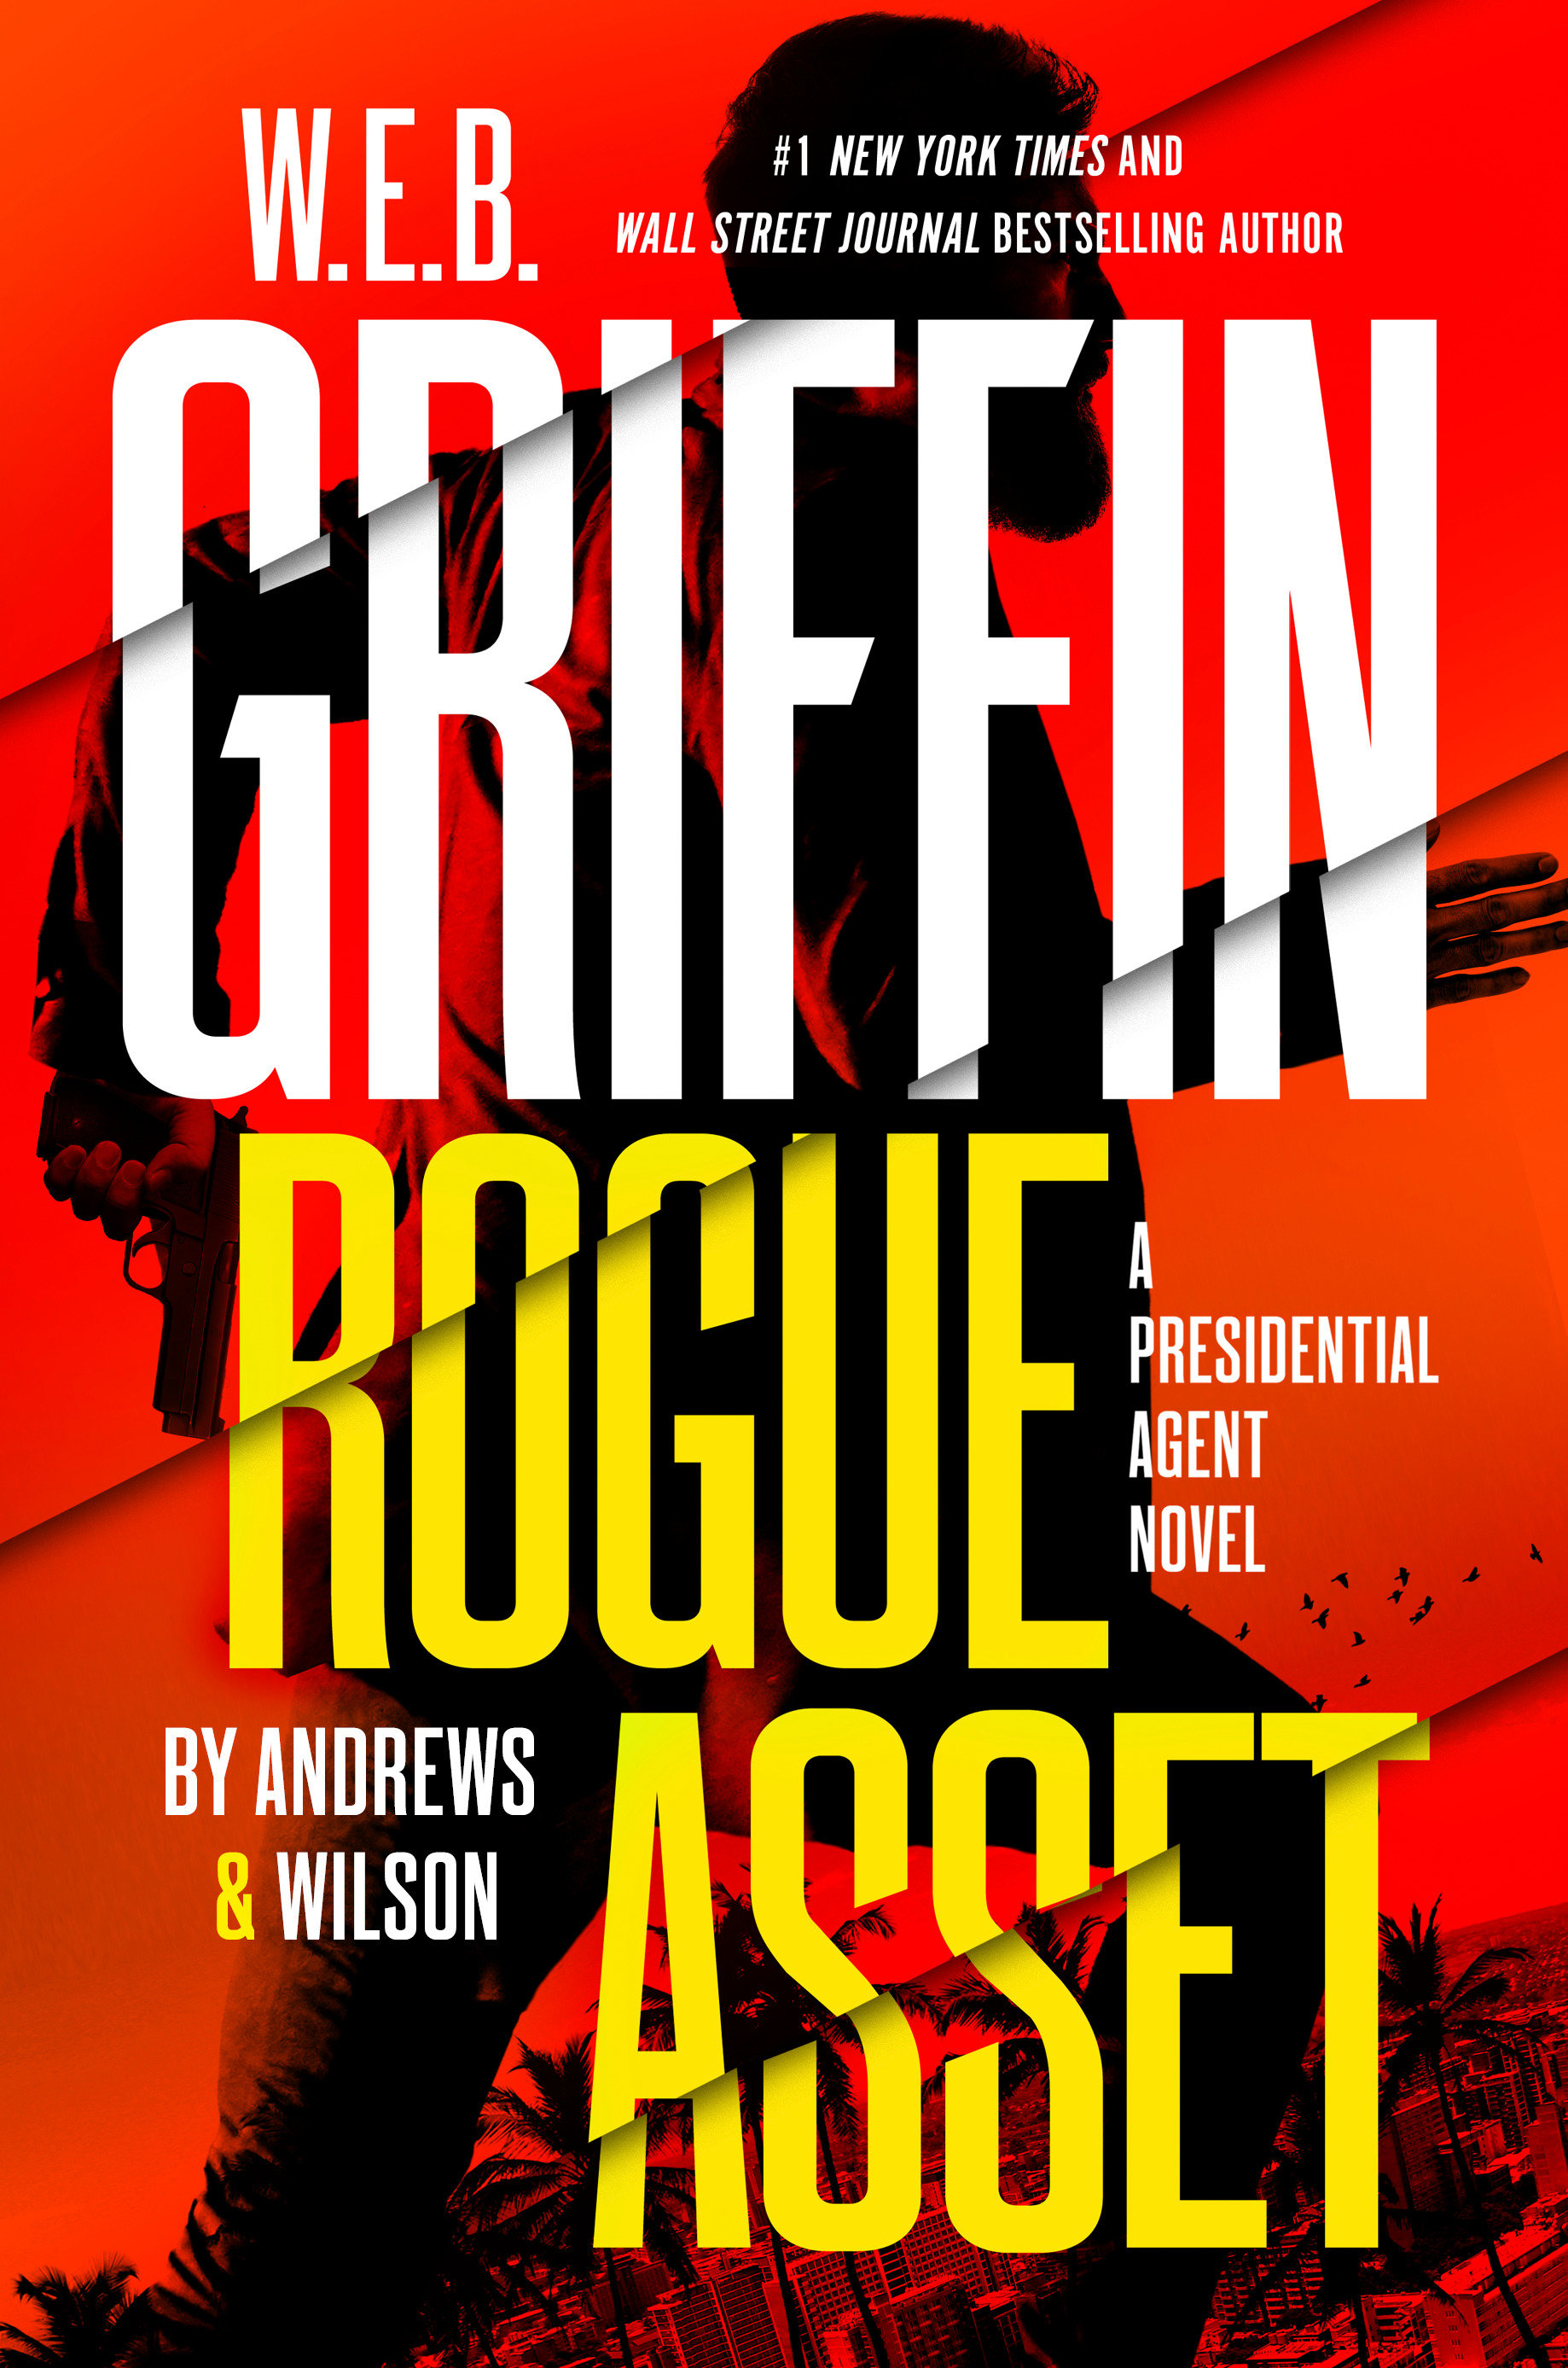 W.E.B. Griffin rogue asset cover image